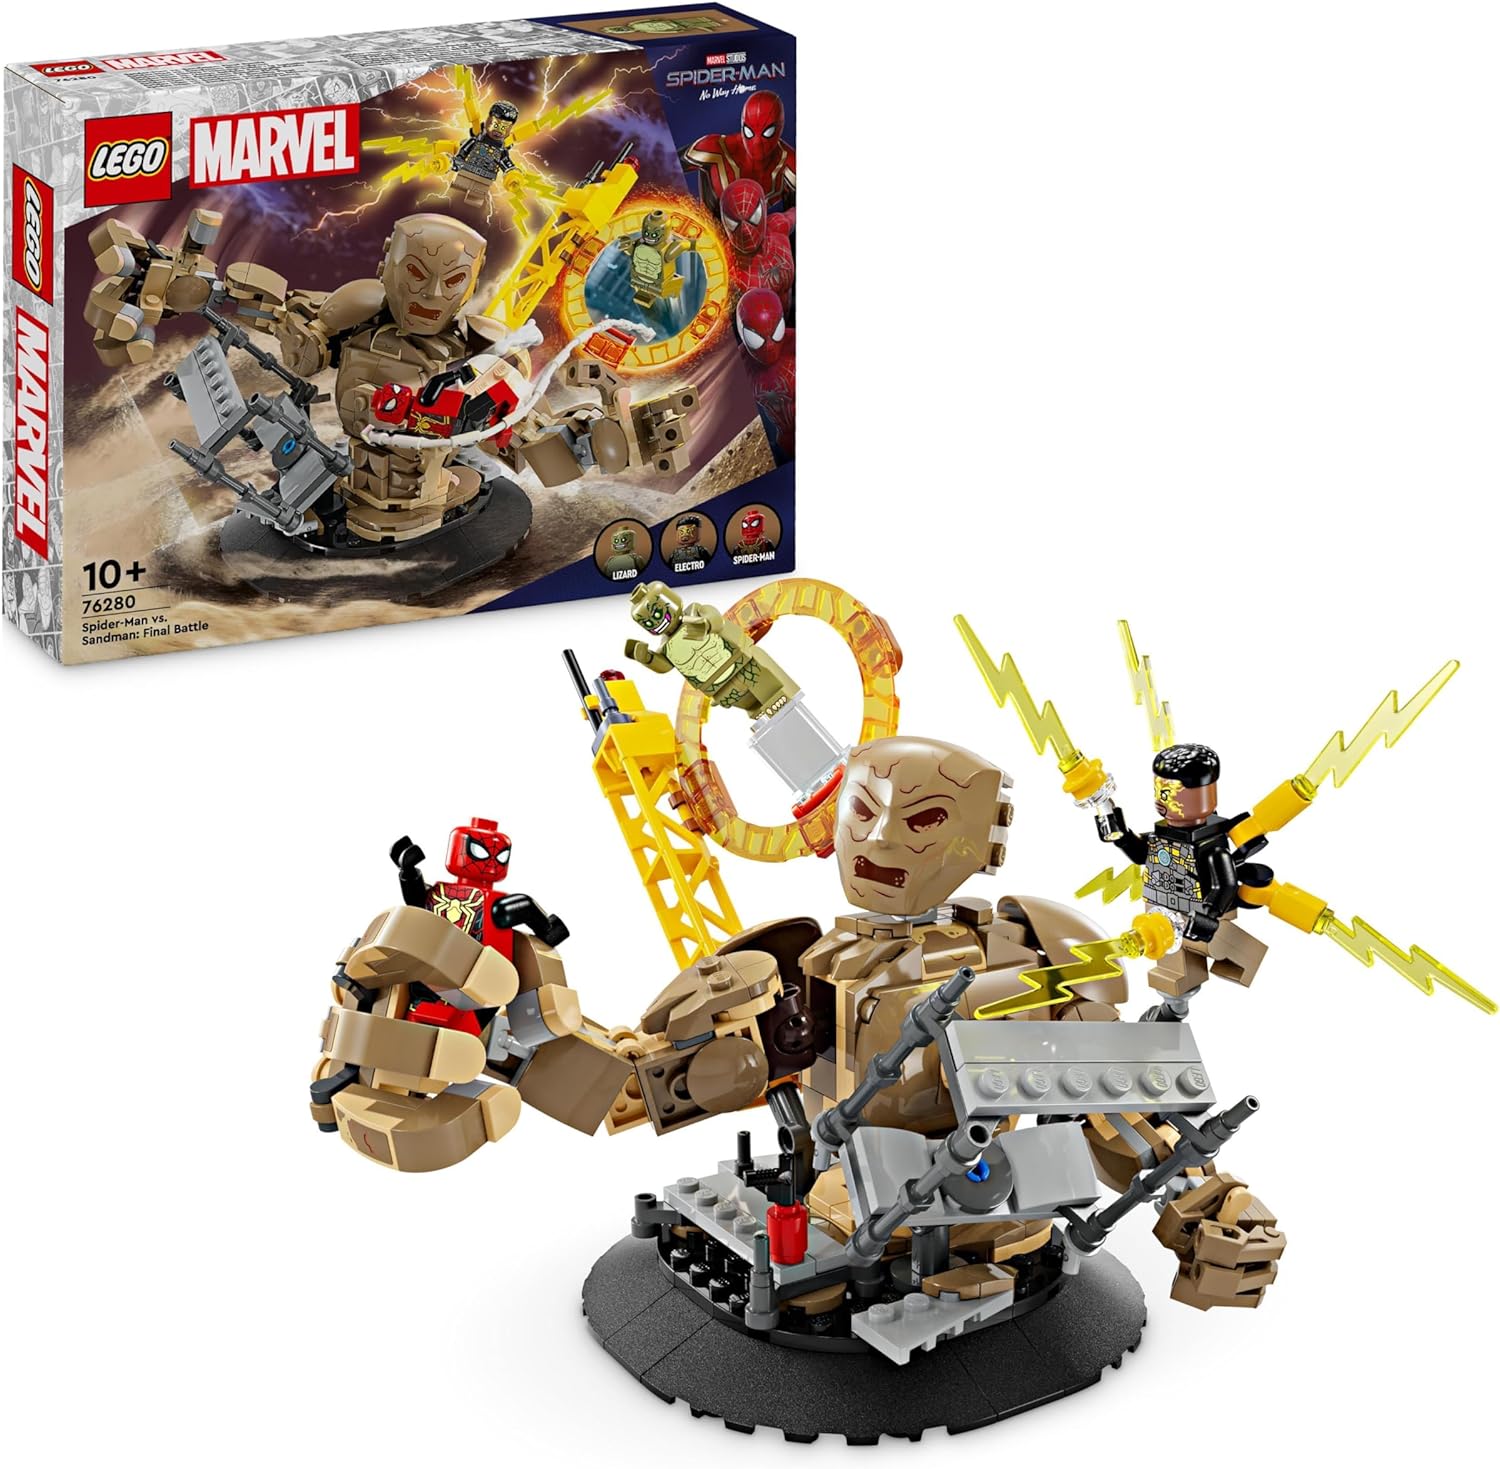 LEGO Marvel Spider-Man vs. Sandman: Showdown, Superhero Fighting Toy with Figures Including Lizard and Electro, Building Toy for Role Play, Gift for Action Enthusiast Boys and Girls 76280